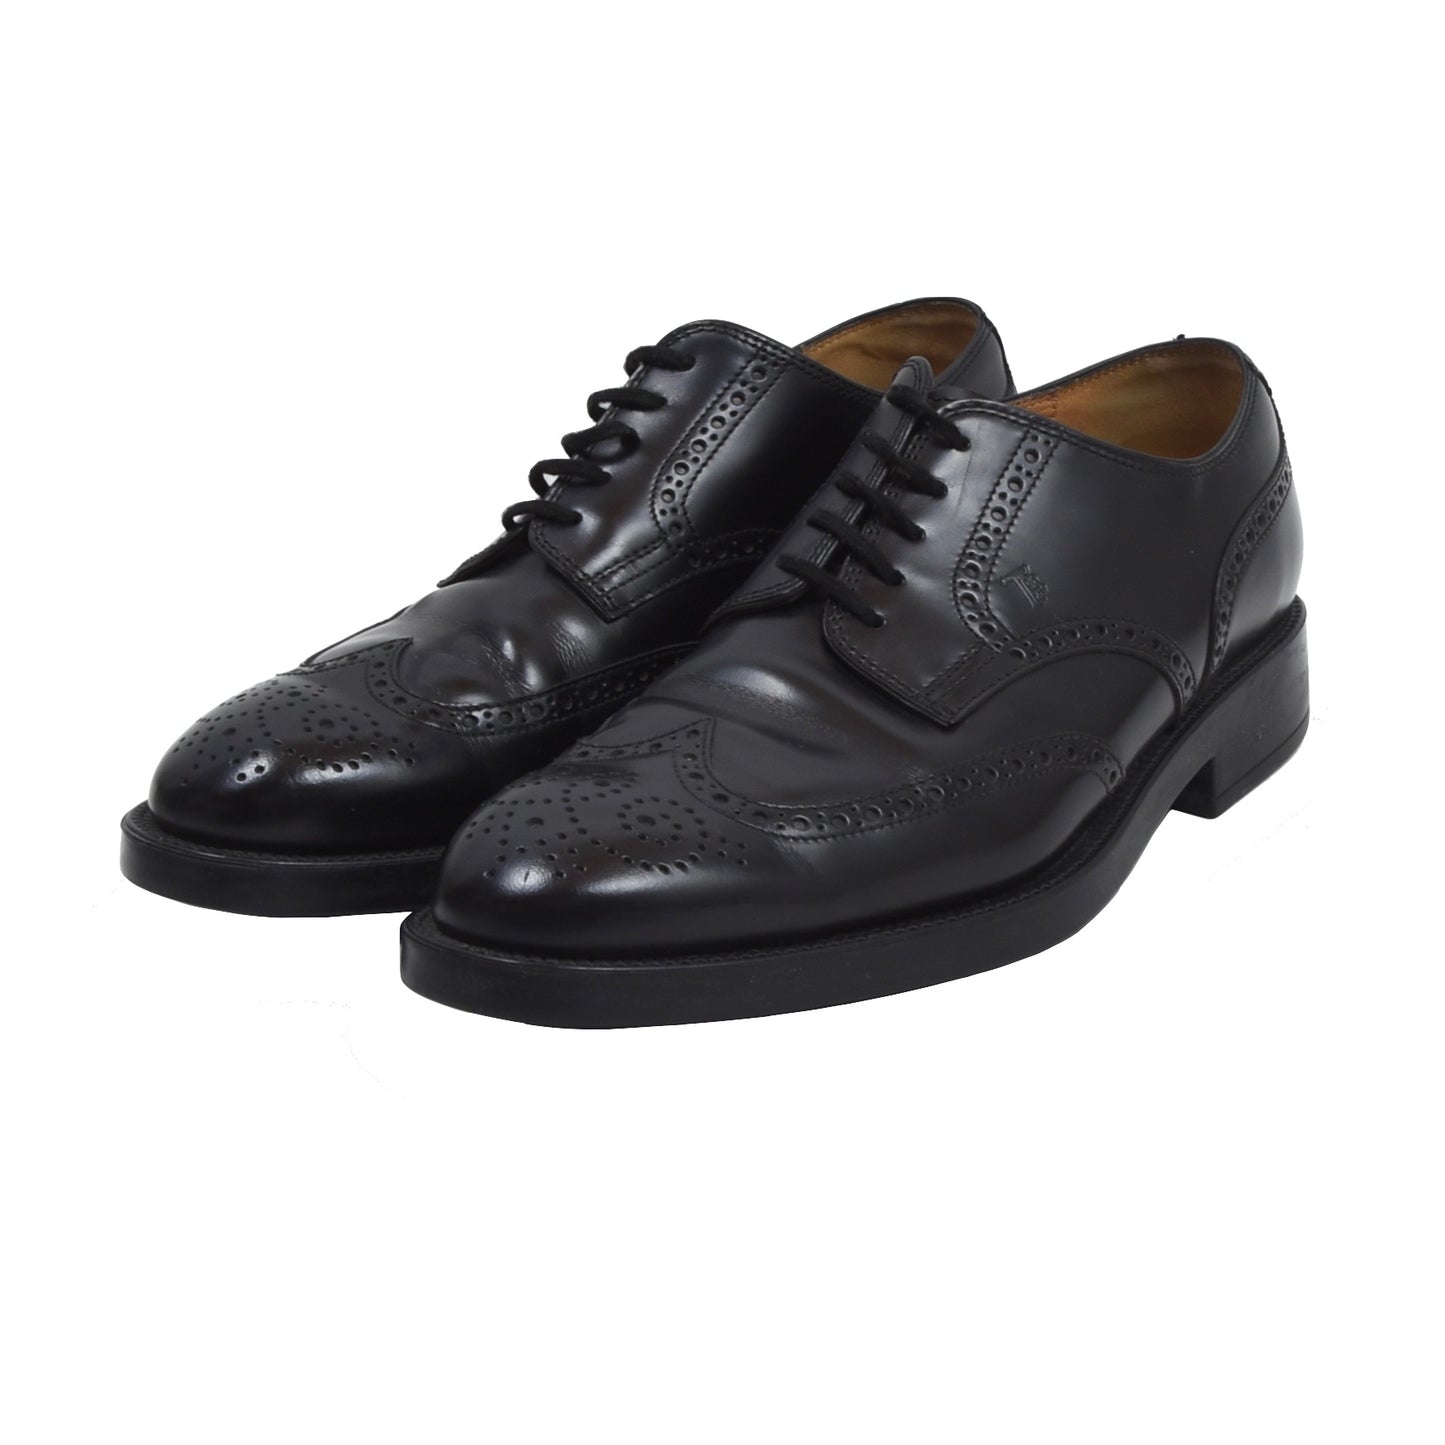 Tod's Brogue Shoes Size 8.5 - Black